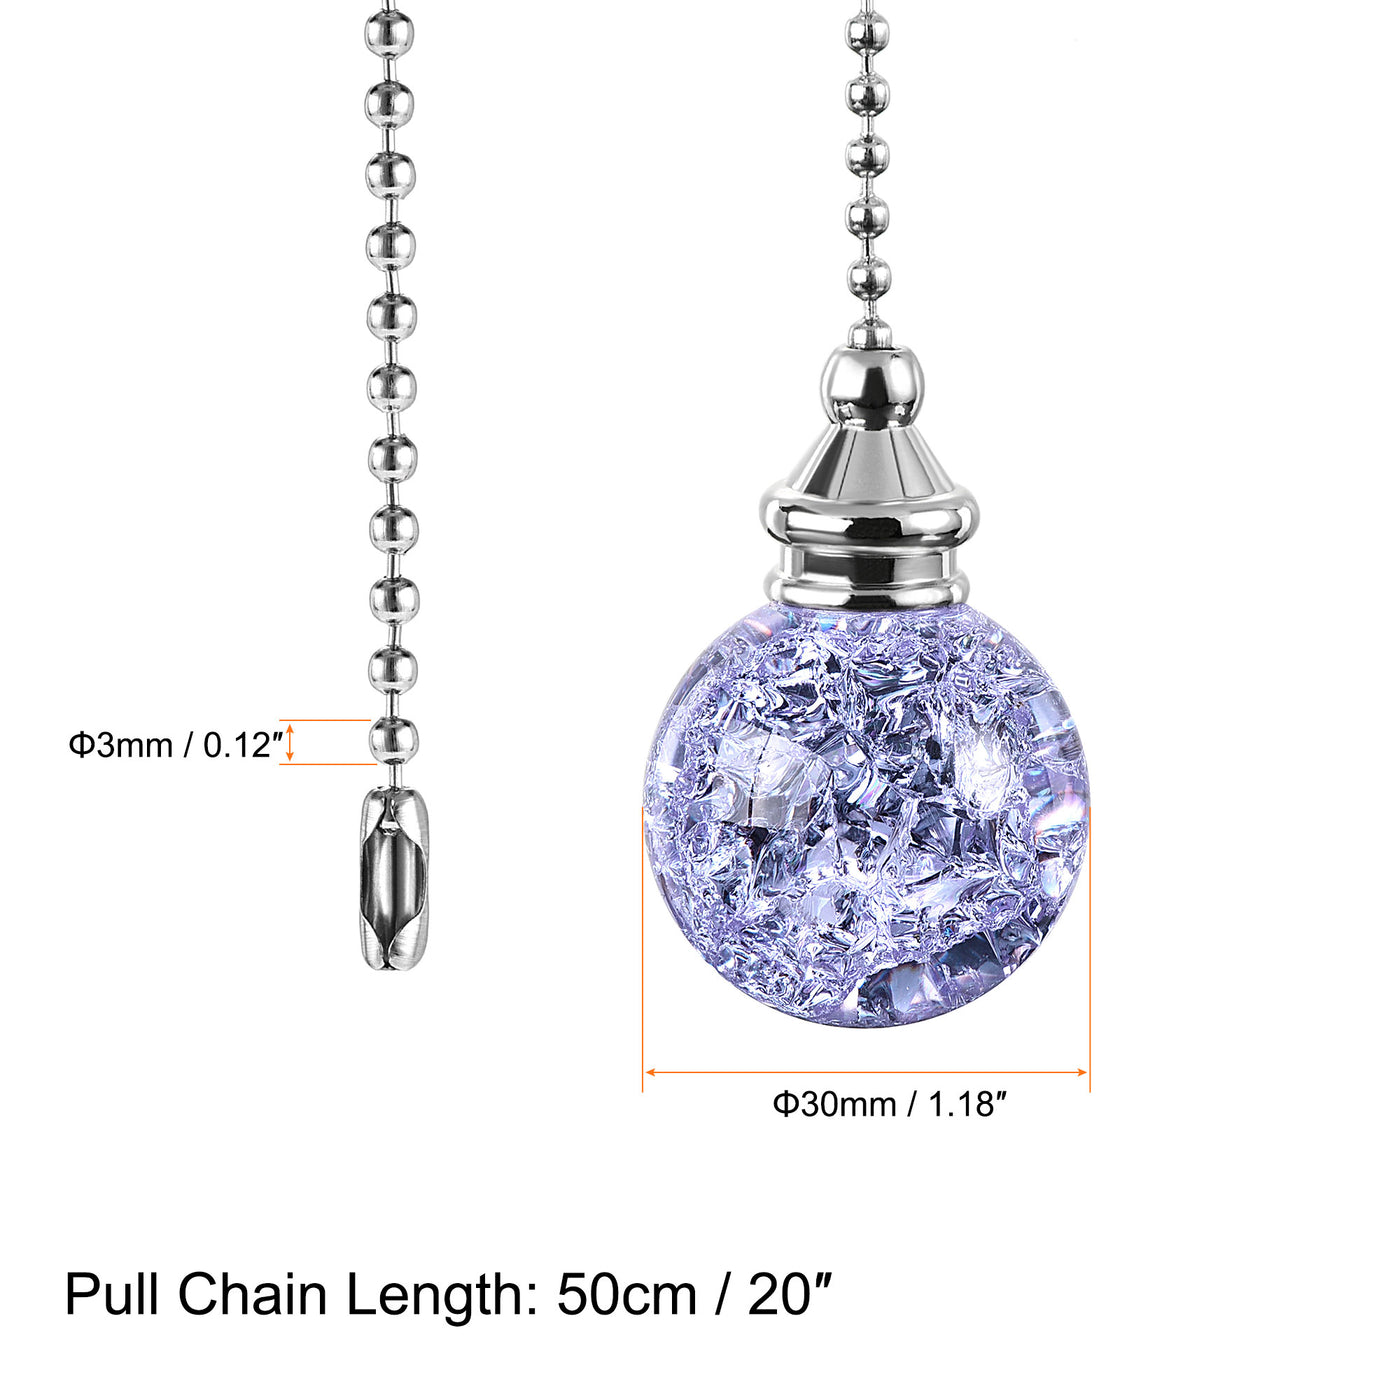 uxcell Uxcell 20 Inch Ceiling Fan Pull Chain, Decorative Crystal Fan Pull Chain Ornament Extension, 3mm Diameter Beaded 30mm Ice Cracked Ball Pendant, Purple 2Pcs